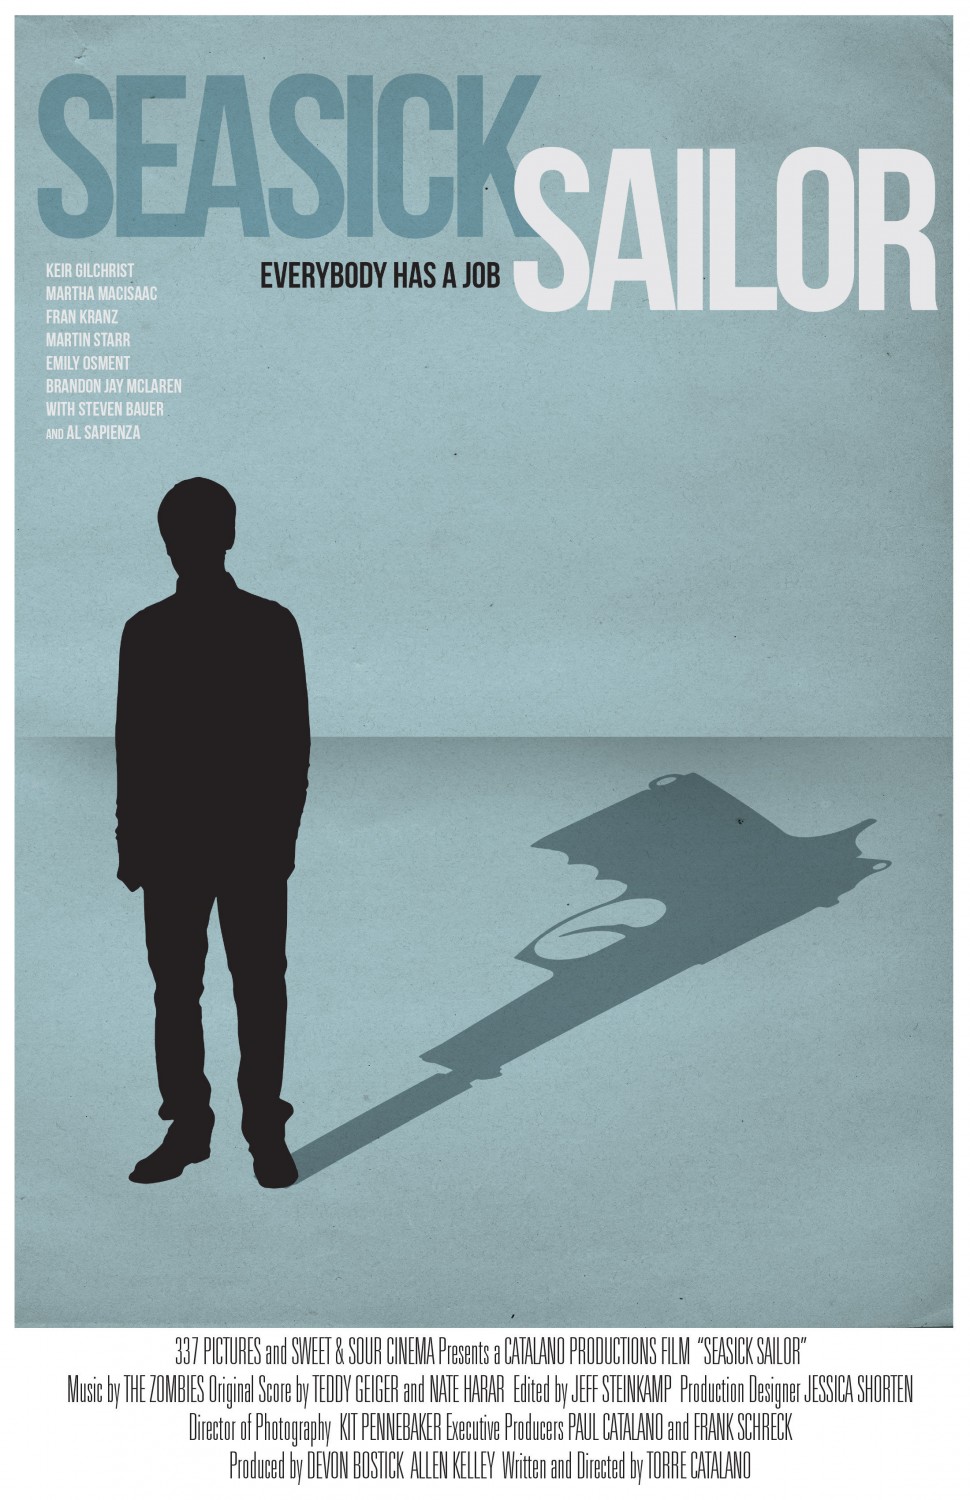 Extra Large Movie Poster Image for Seasick Sailor